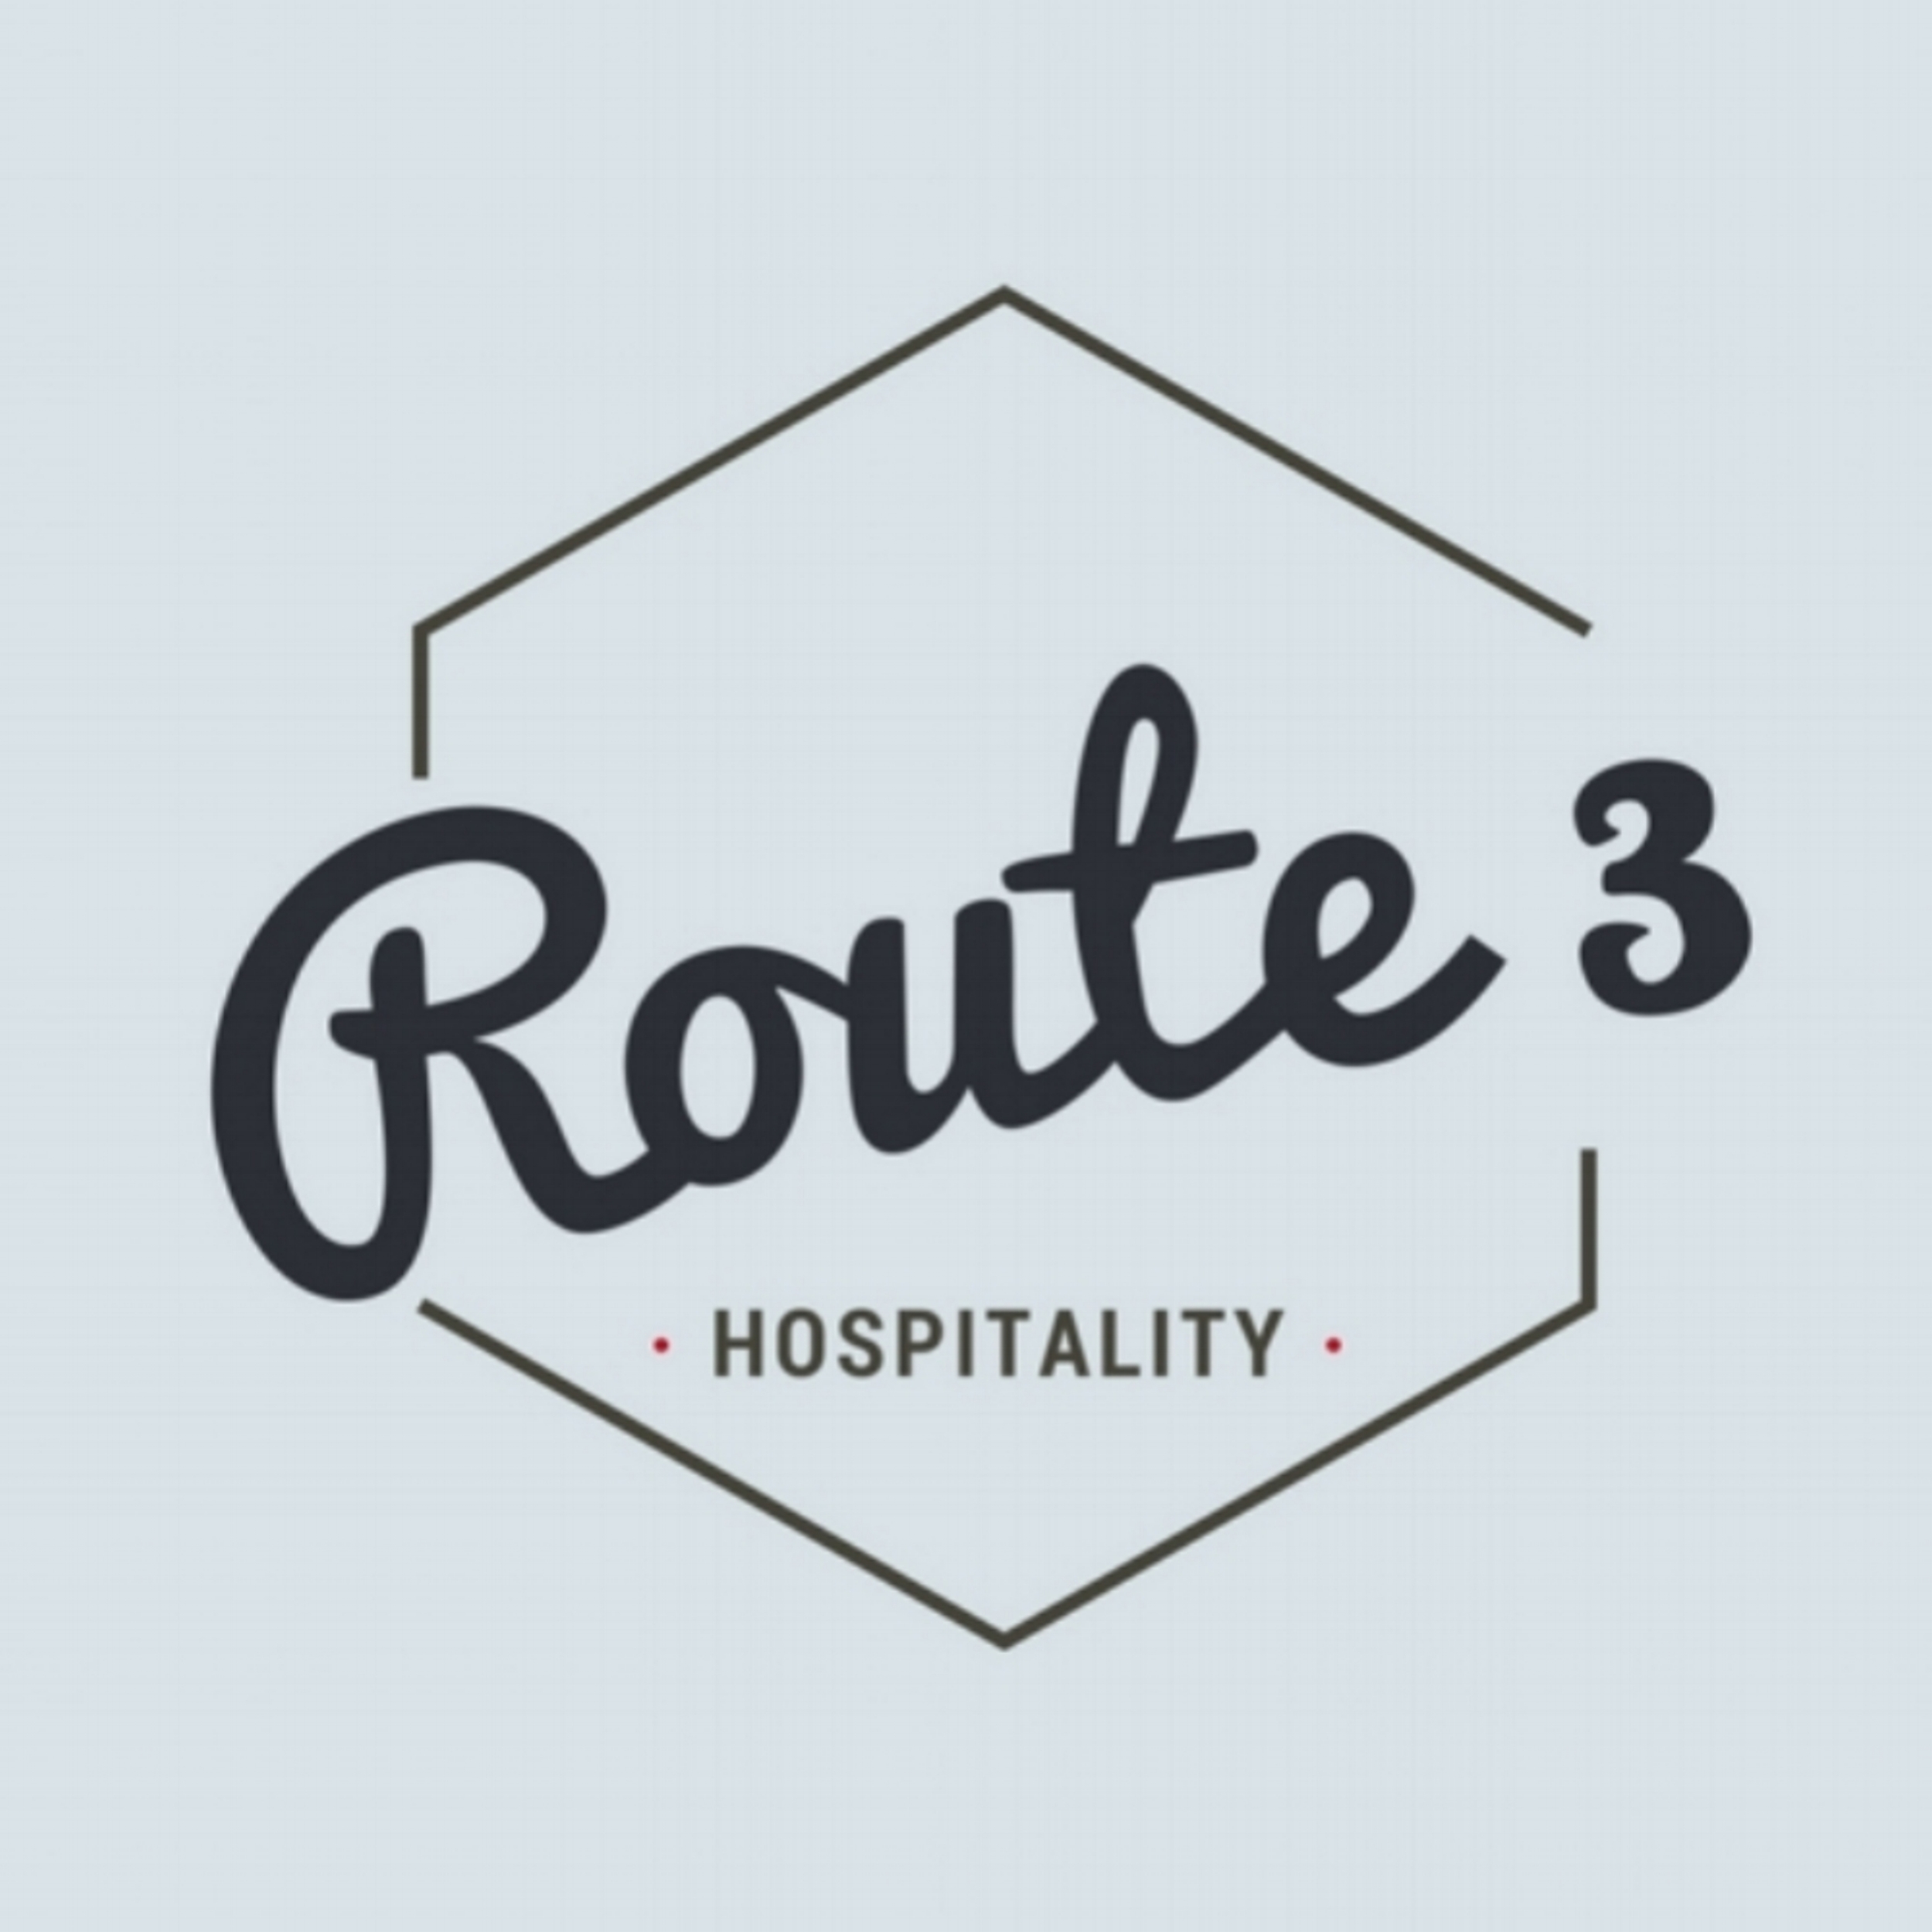  Route 3 Hospitality